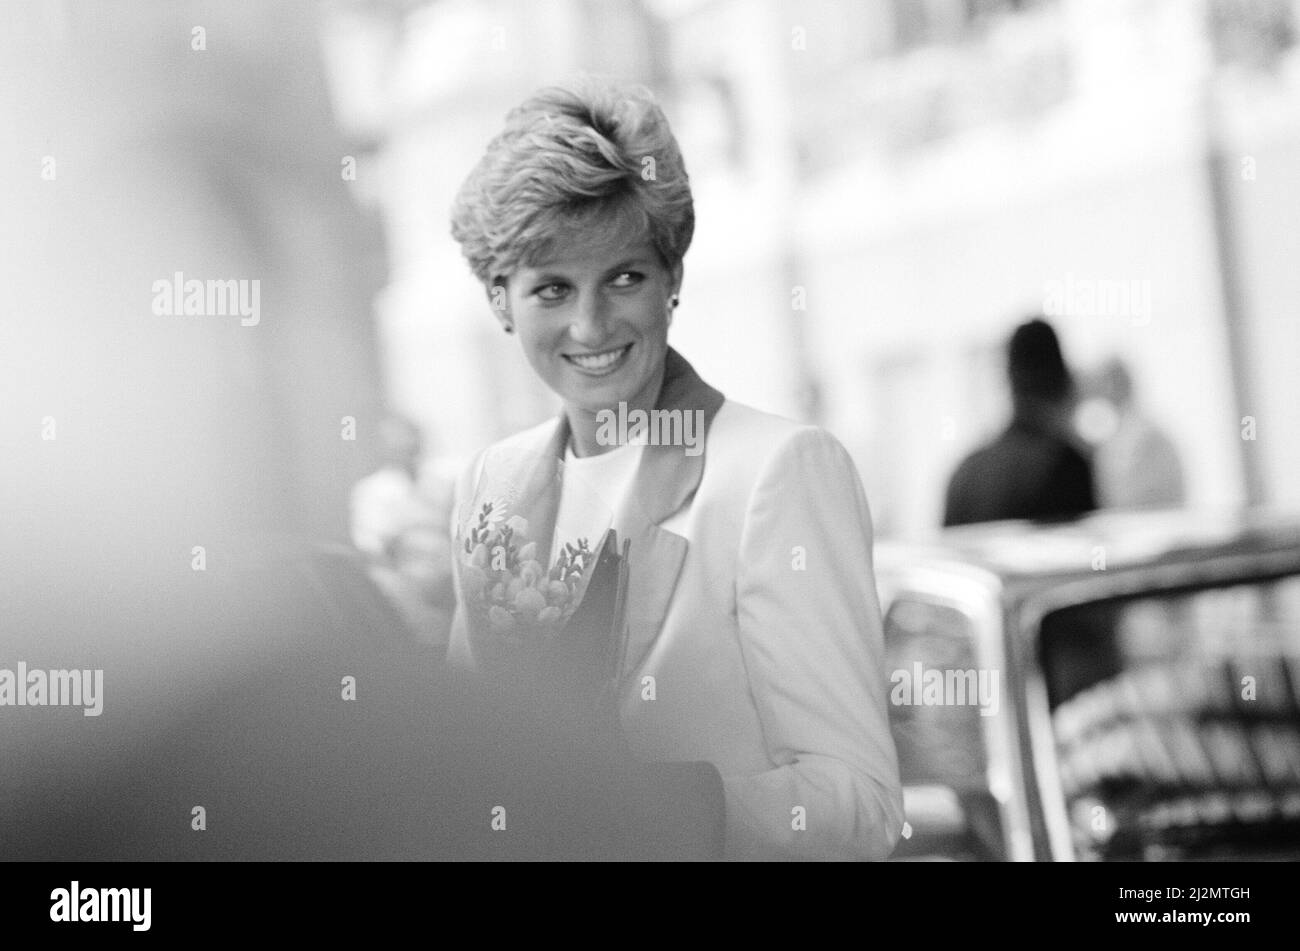 HRH The Princess of Wales, Princess Diana, arrives at The Savoy Hotel in London on her 30th birthday.Well-wishers are outside to give her flowers and presents.  Picture taken 1st July 1991 Stock Photo